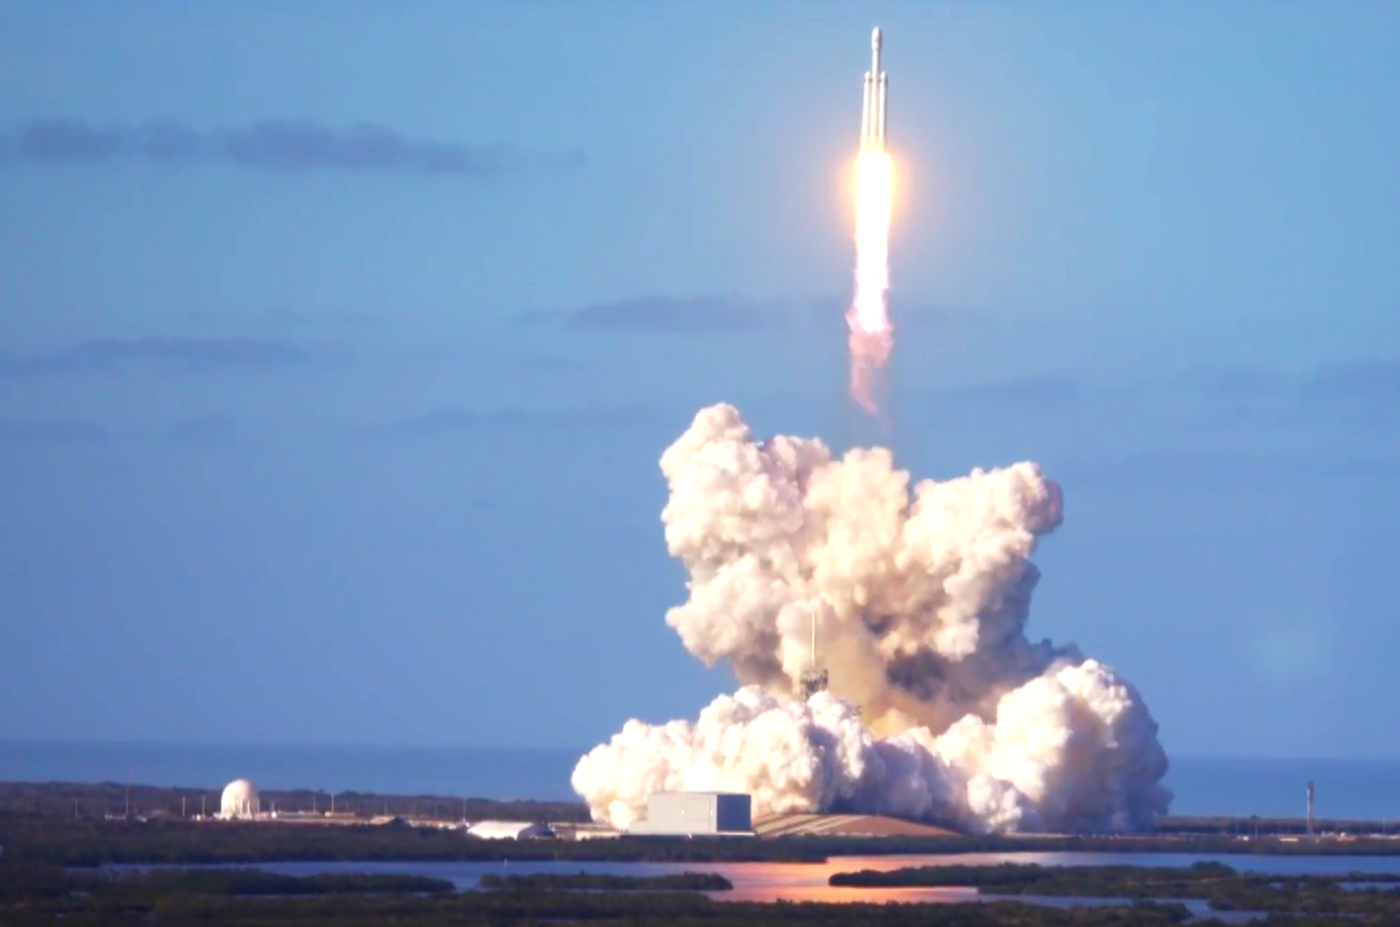 SpaceX's Falcon Heavy rocket as it blasted off from launch pad 39A in Cape Canaveral on Tuesday.